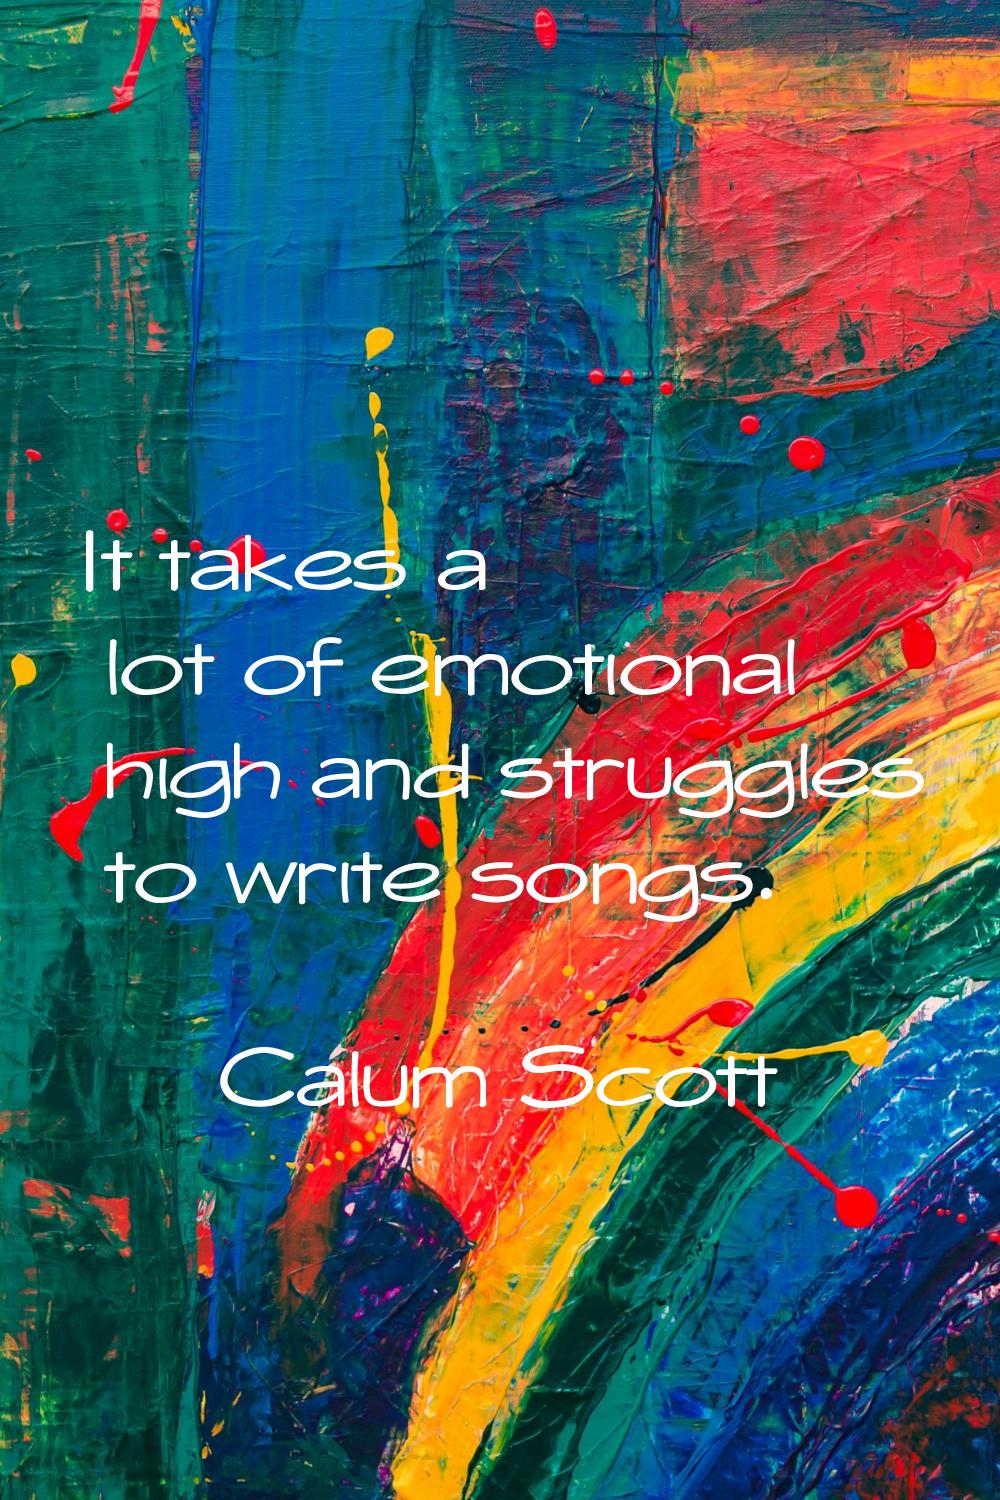 It takes a lot of emotional high and struggles to write songs.